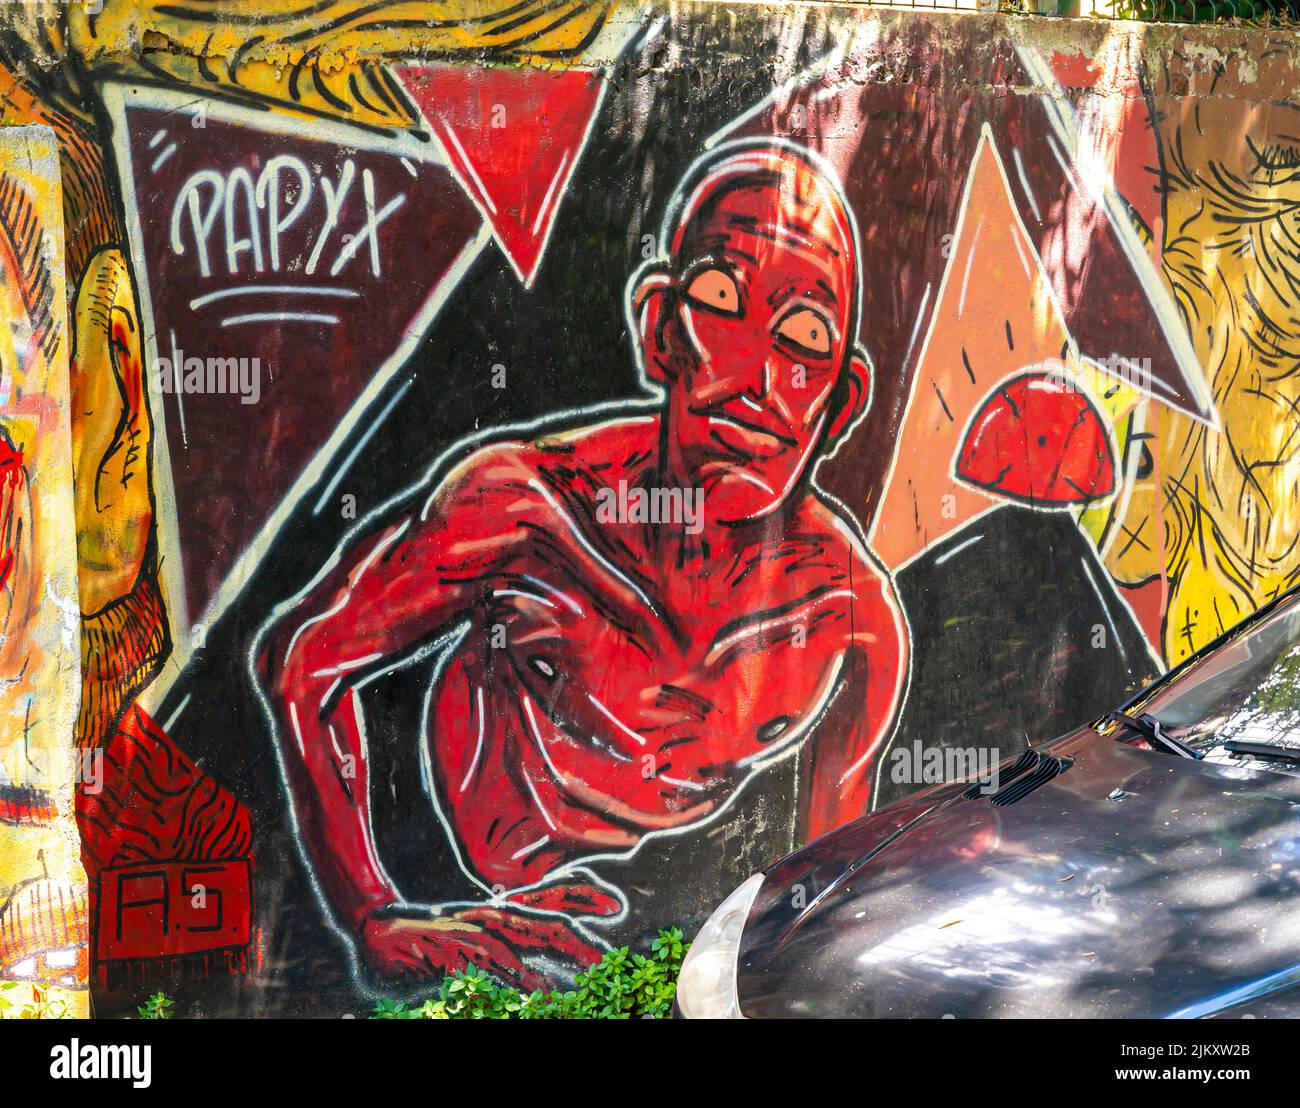 Street art, mural by Papyx depicting a red man in Moda, Kadiköy district of Istanbul, Turkey Stock Photo